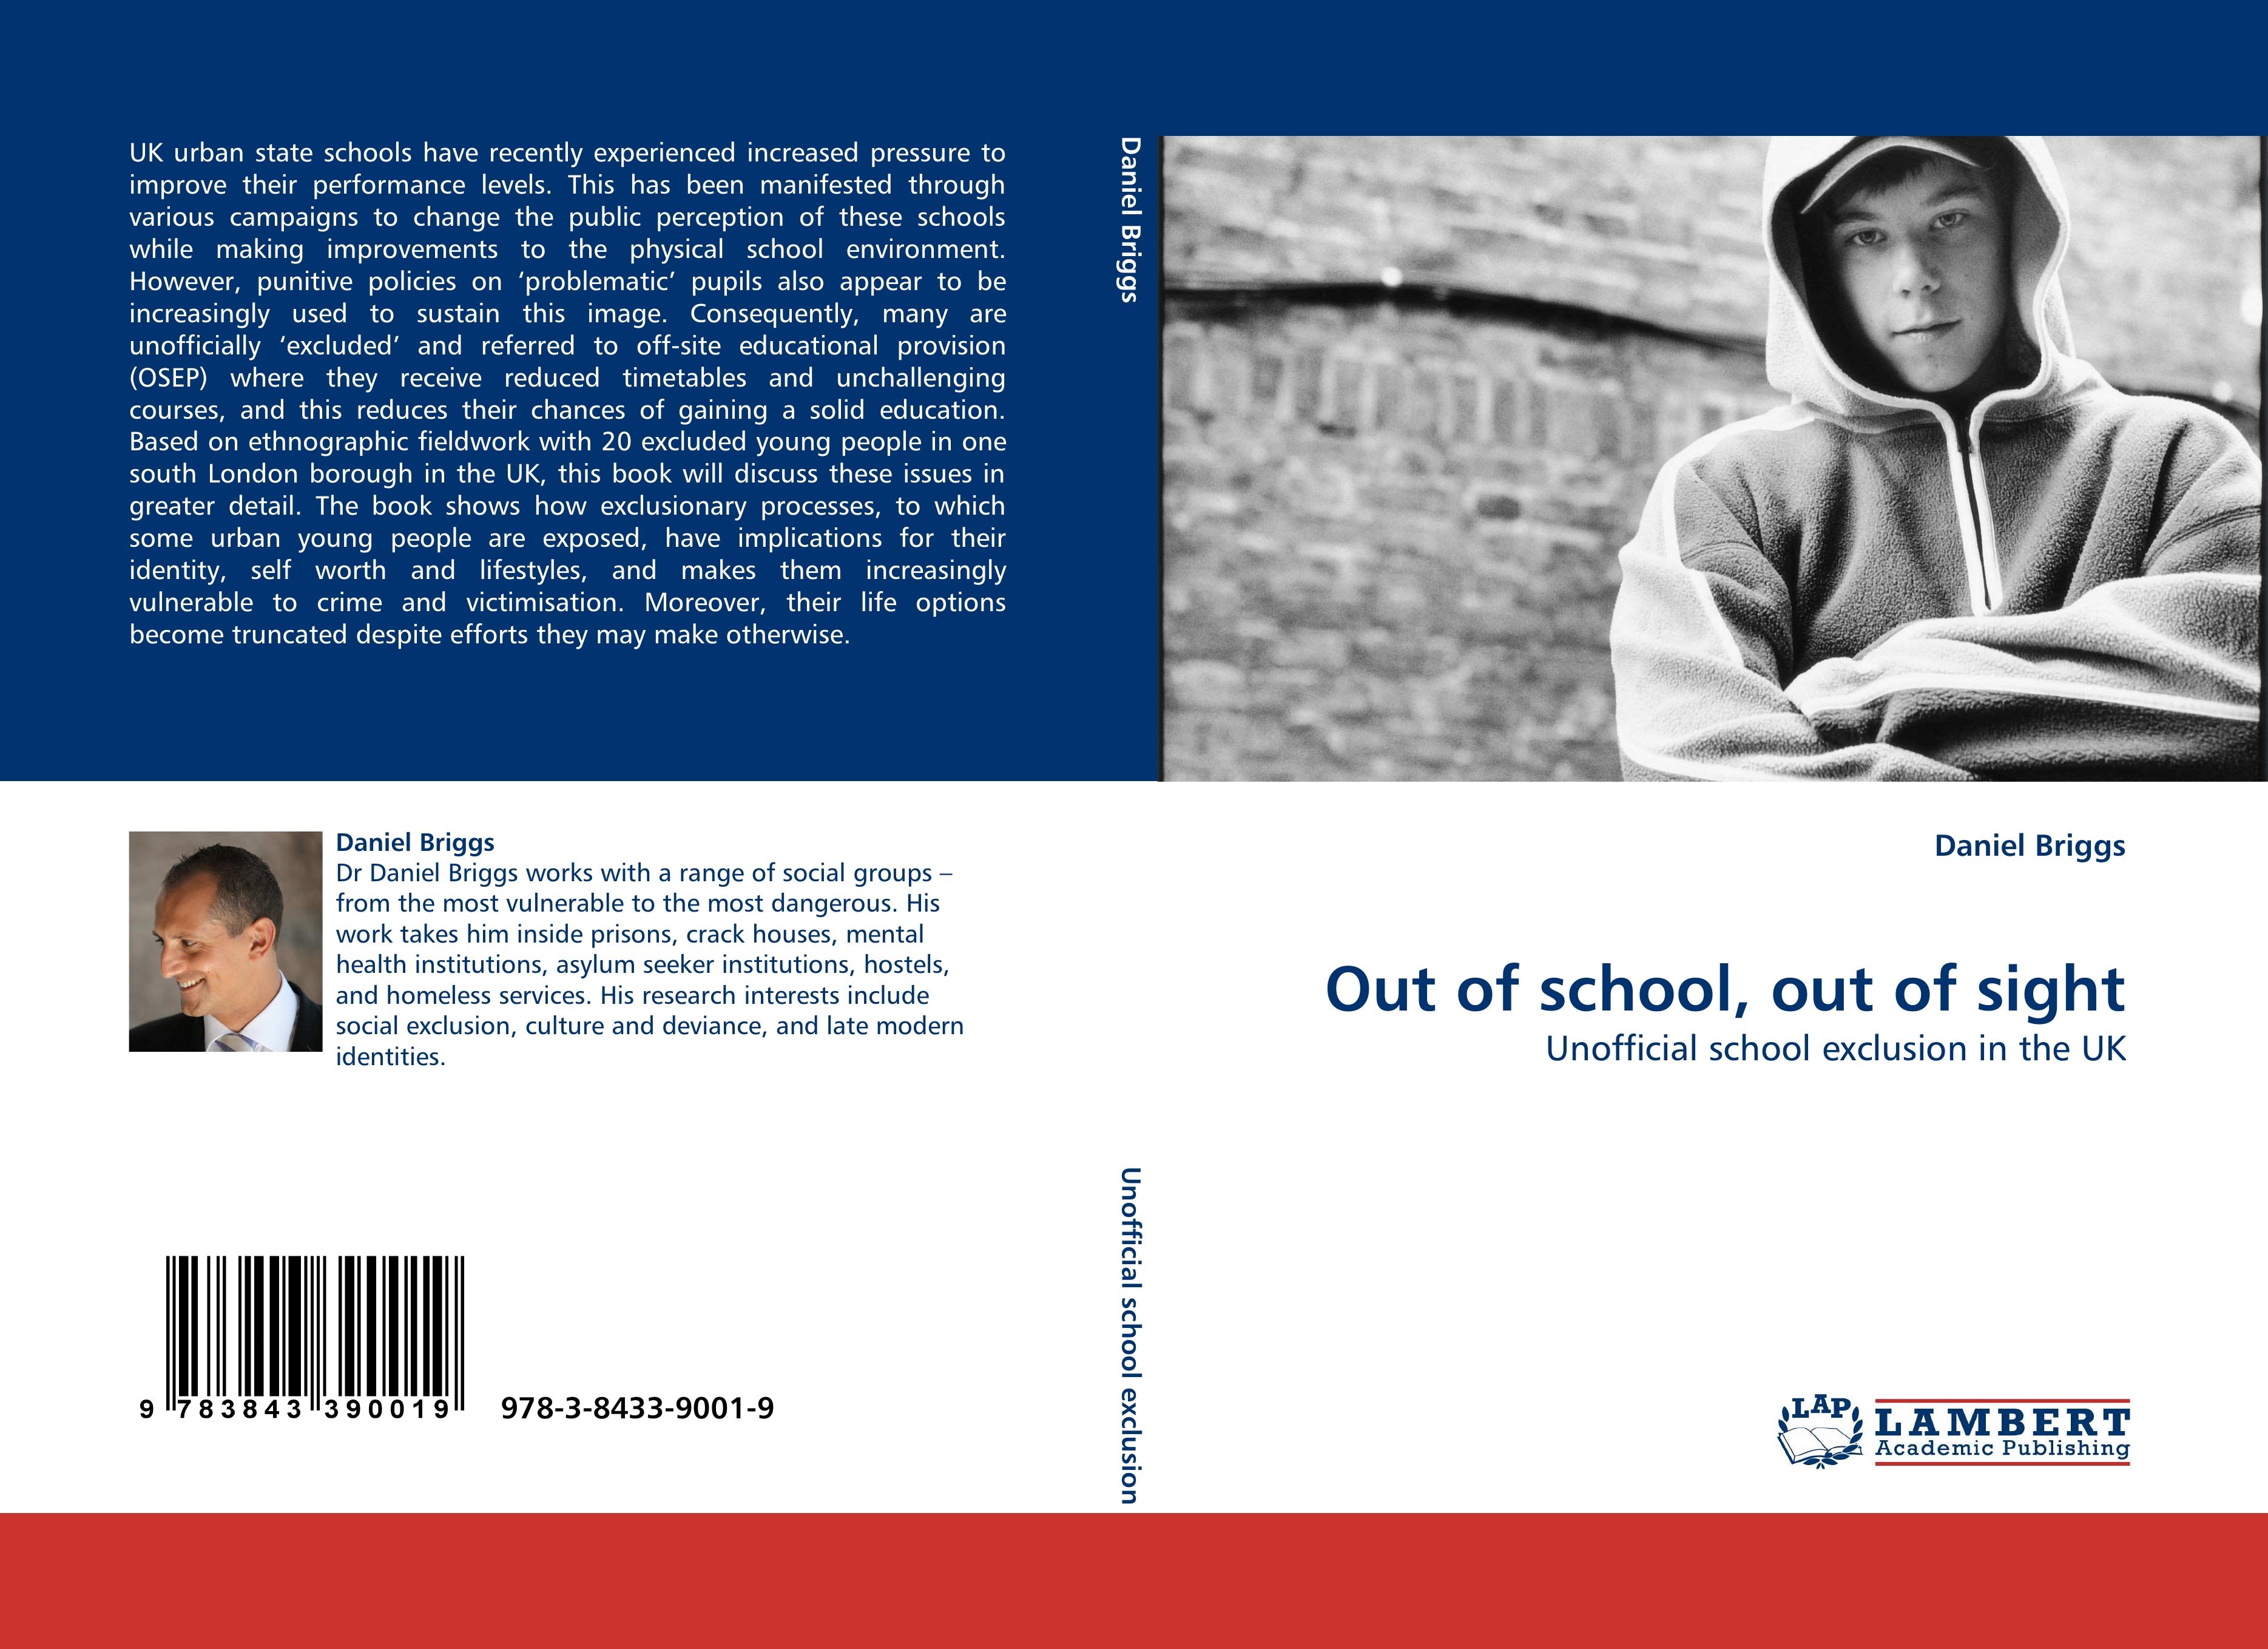 Out of school, out of sight - Daniel Briggs